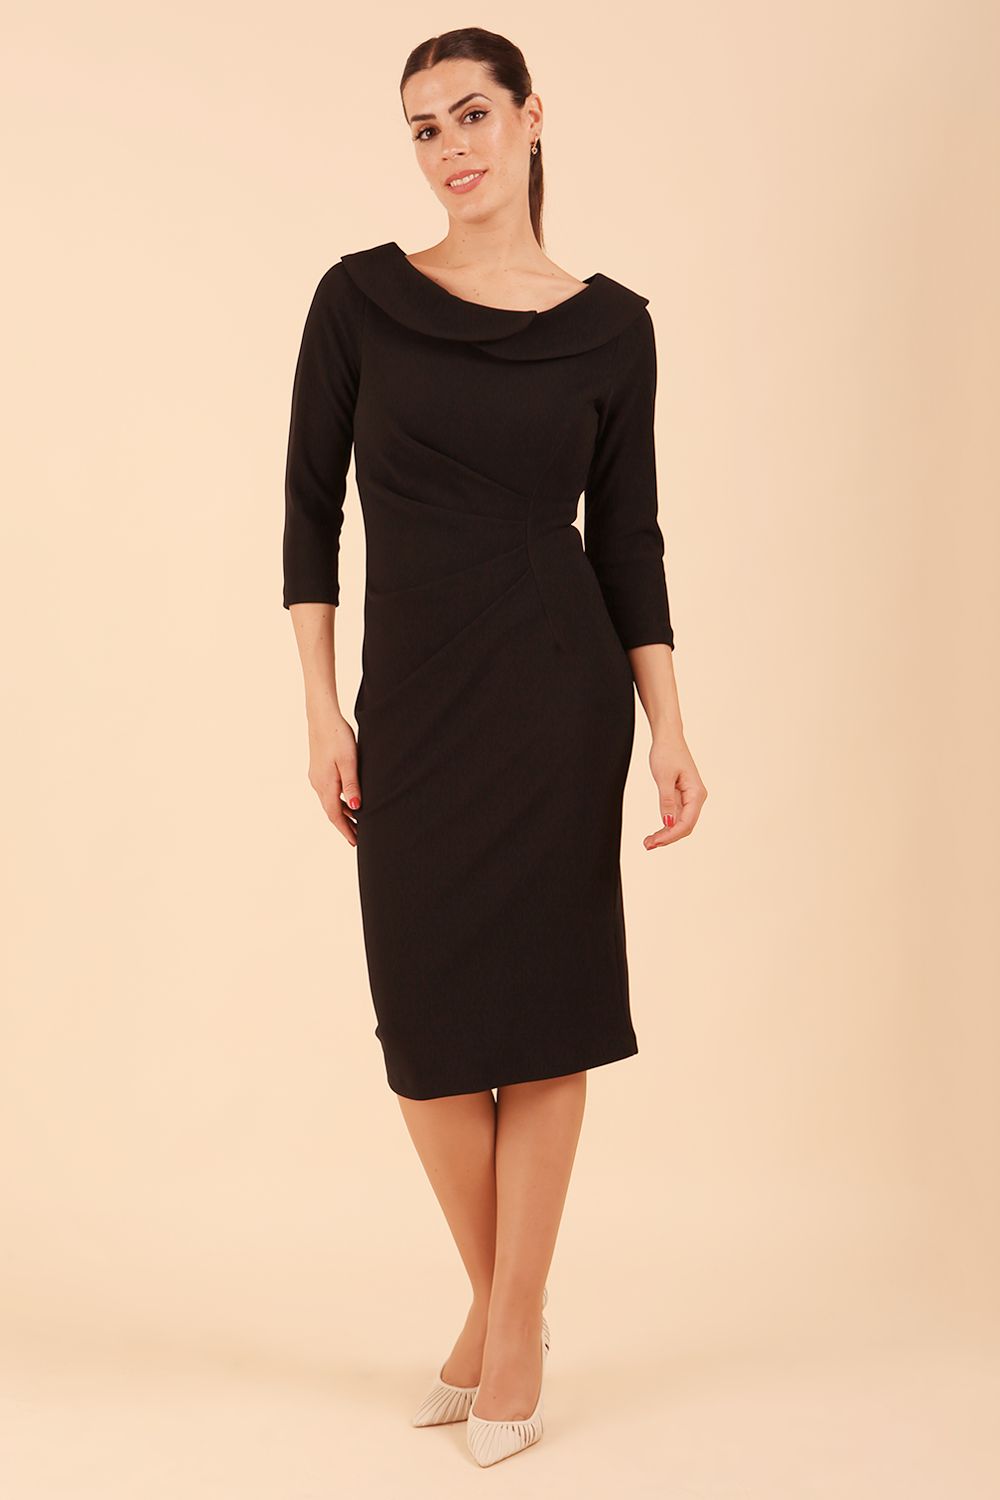 Model wearing diva catwalk Monique 3/4 Sleeve Pencil Dress with Overlapping Folded Round Neckline and 3/4 sleeves and knee length in Black front